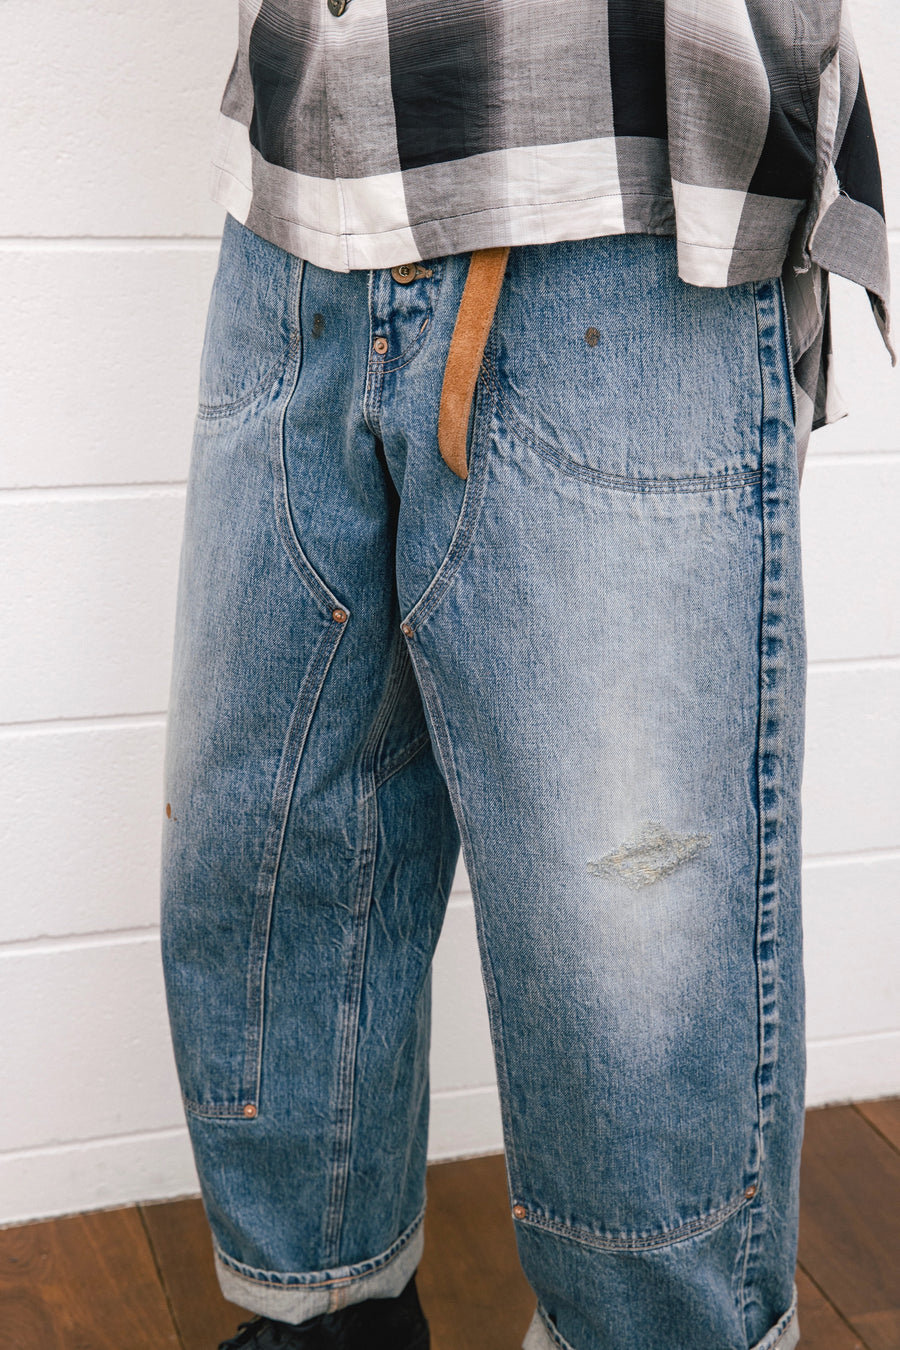 Sugarhill (Sugar Hill) Faded Double Knee Denim Pants Producted by